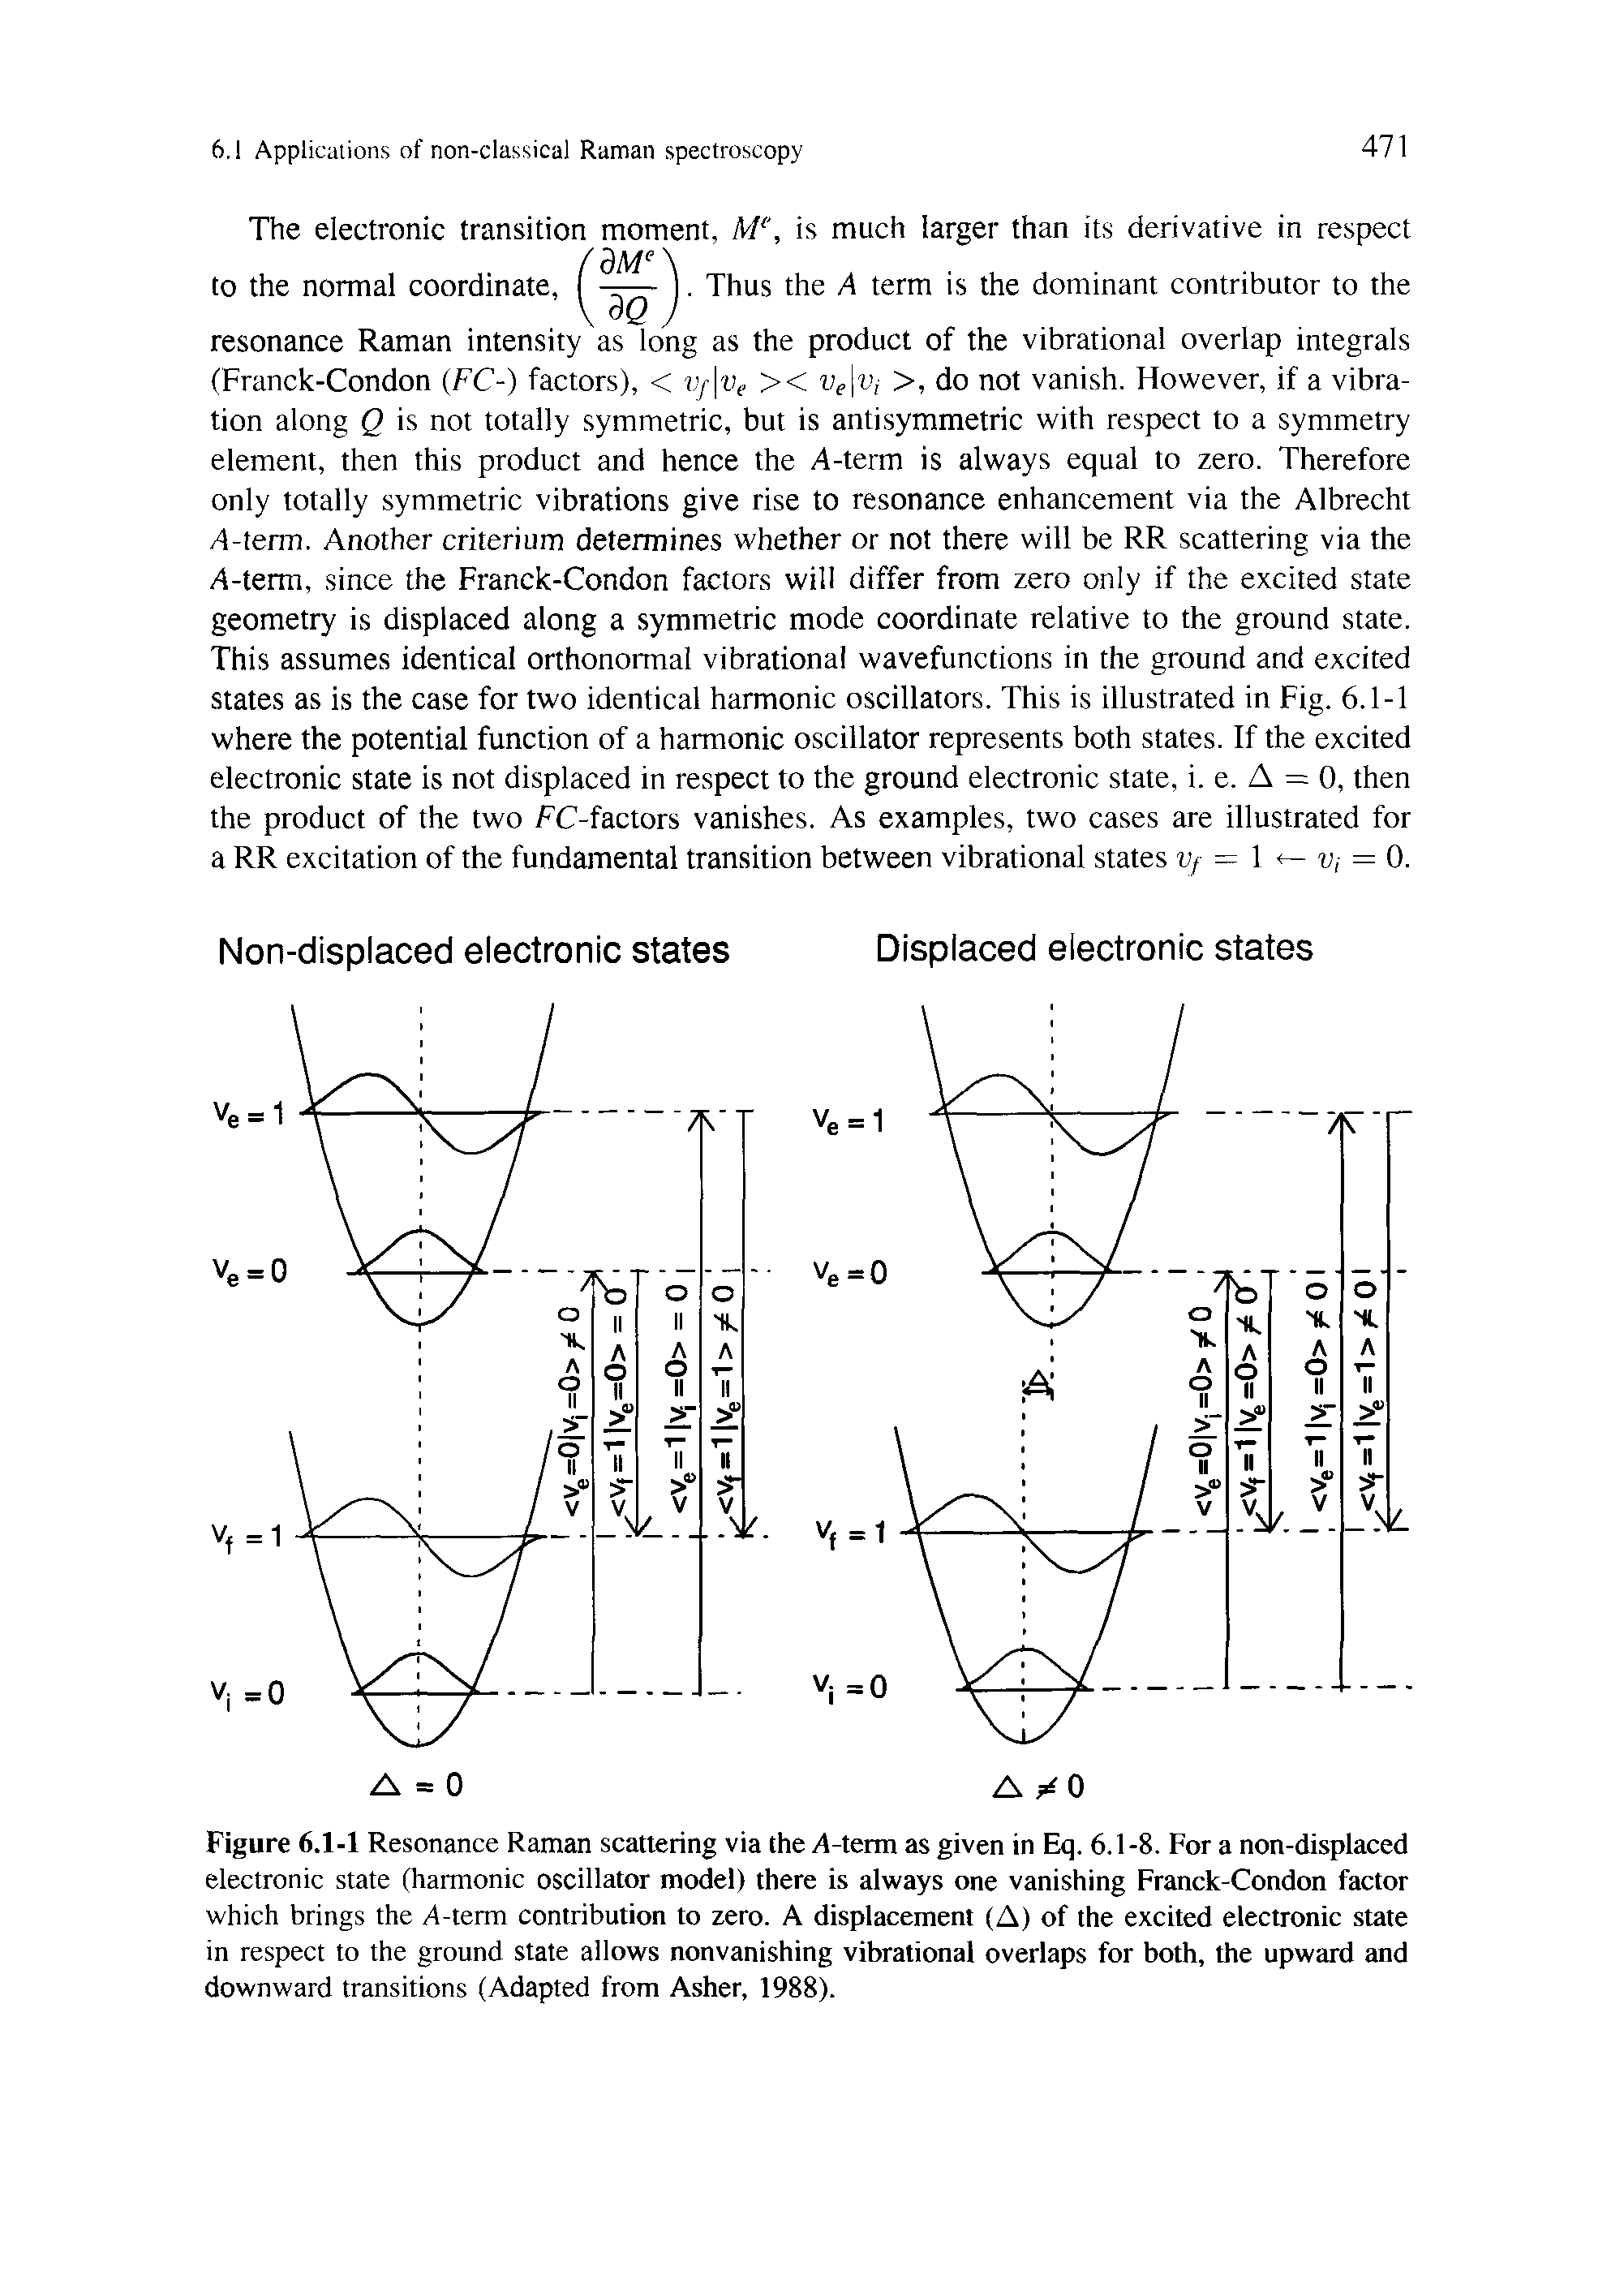 Figure 6.1-1 Resonance Raman scattering via the A-term as given in Eq. 6.1-8. For a non-displaced electronic state (harmonic oscillator model) there is always one vanishing Franck-Condon factor which brings the A-term contribution to zero. A displacement (A) of the excited electronic state in respect to the ground state allows nonvanishing vibrational overlaps for both, the upward and downward transitions (Adapted from Asher, 1988).